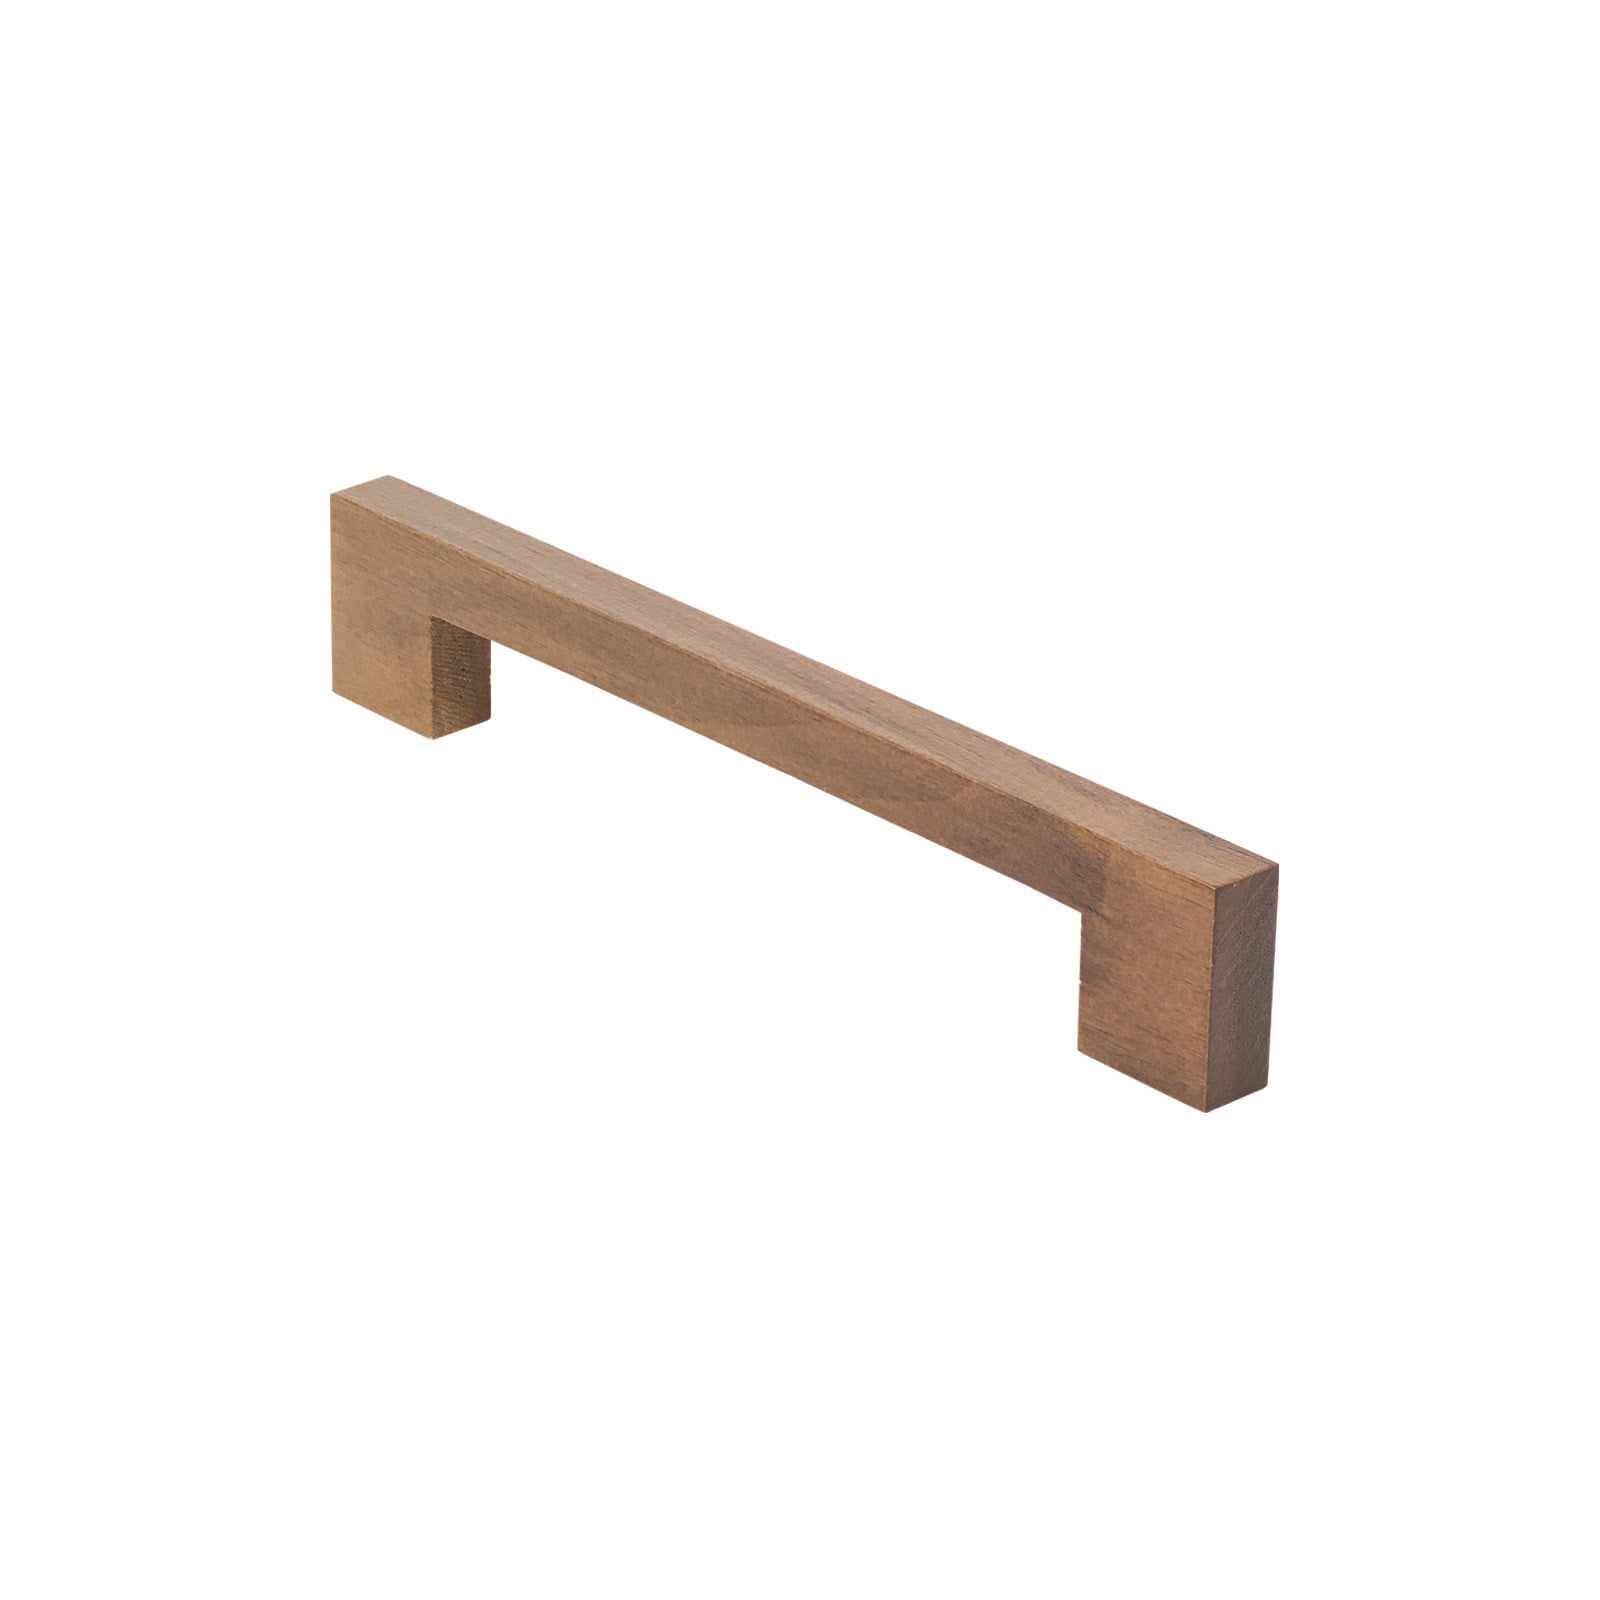 SHOW 160mm Metro Cabinet Pull Handle In Walnut Finish